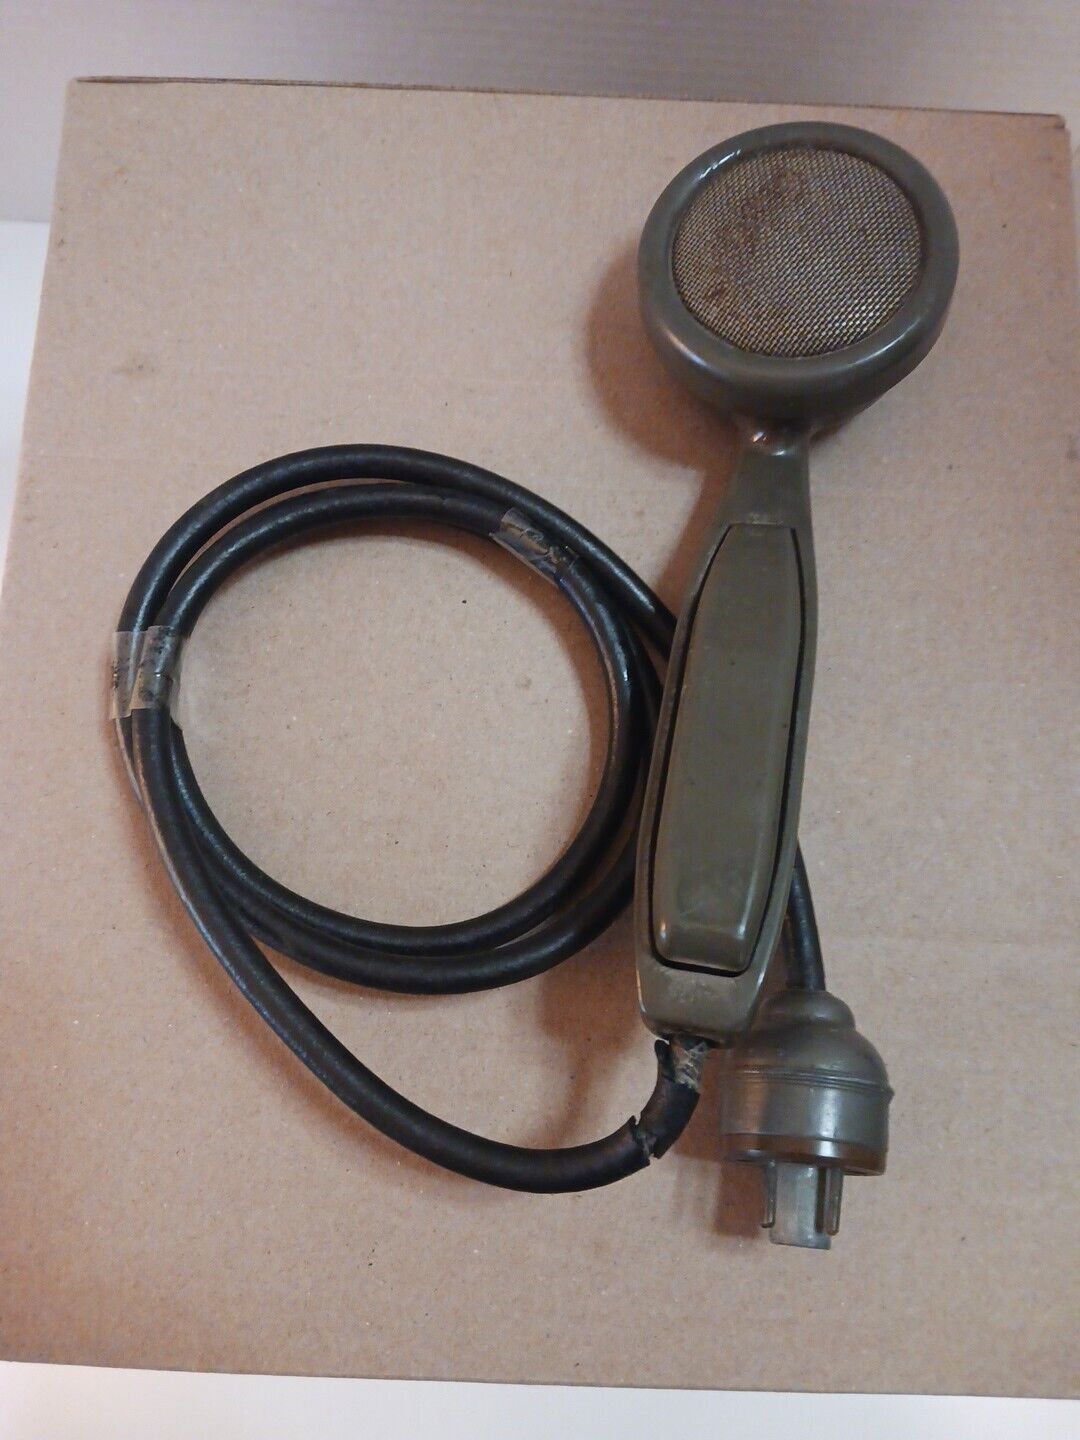 EXTREMELY RARE Vintage EDISON EDIPHONE Transcription Hand Held MICROPHONE